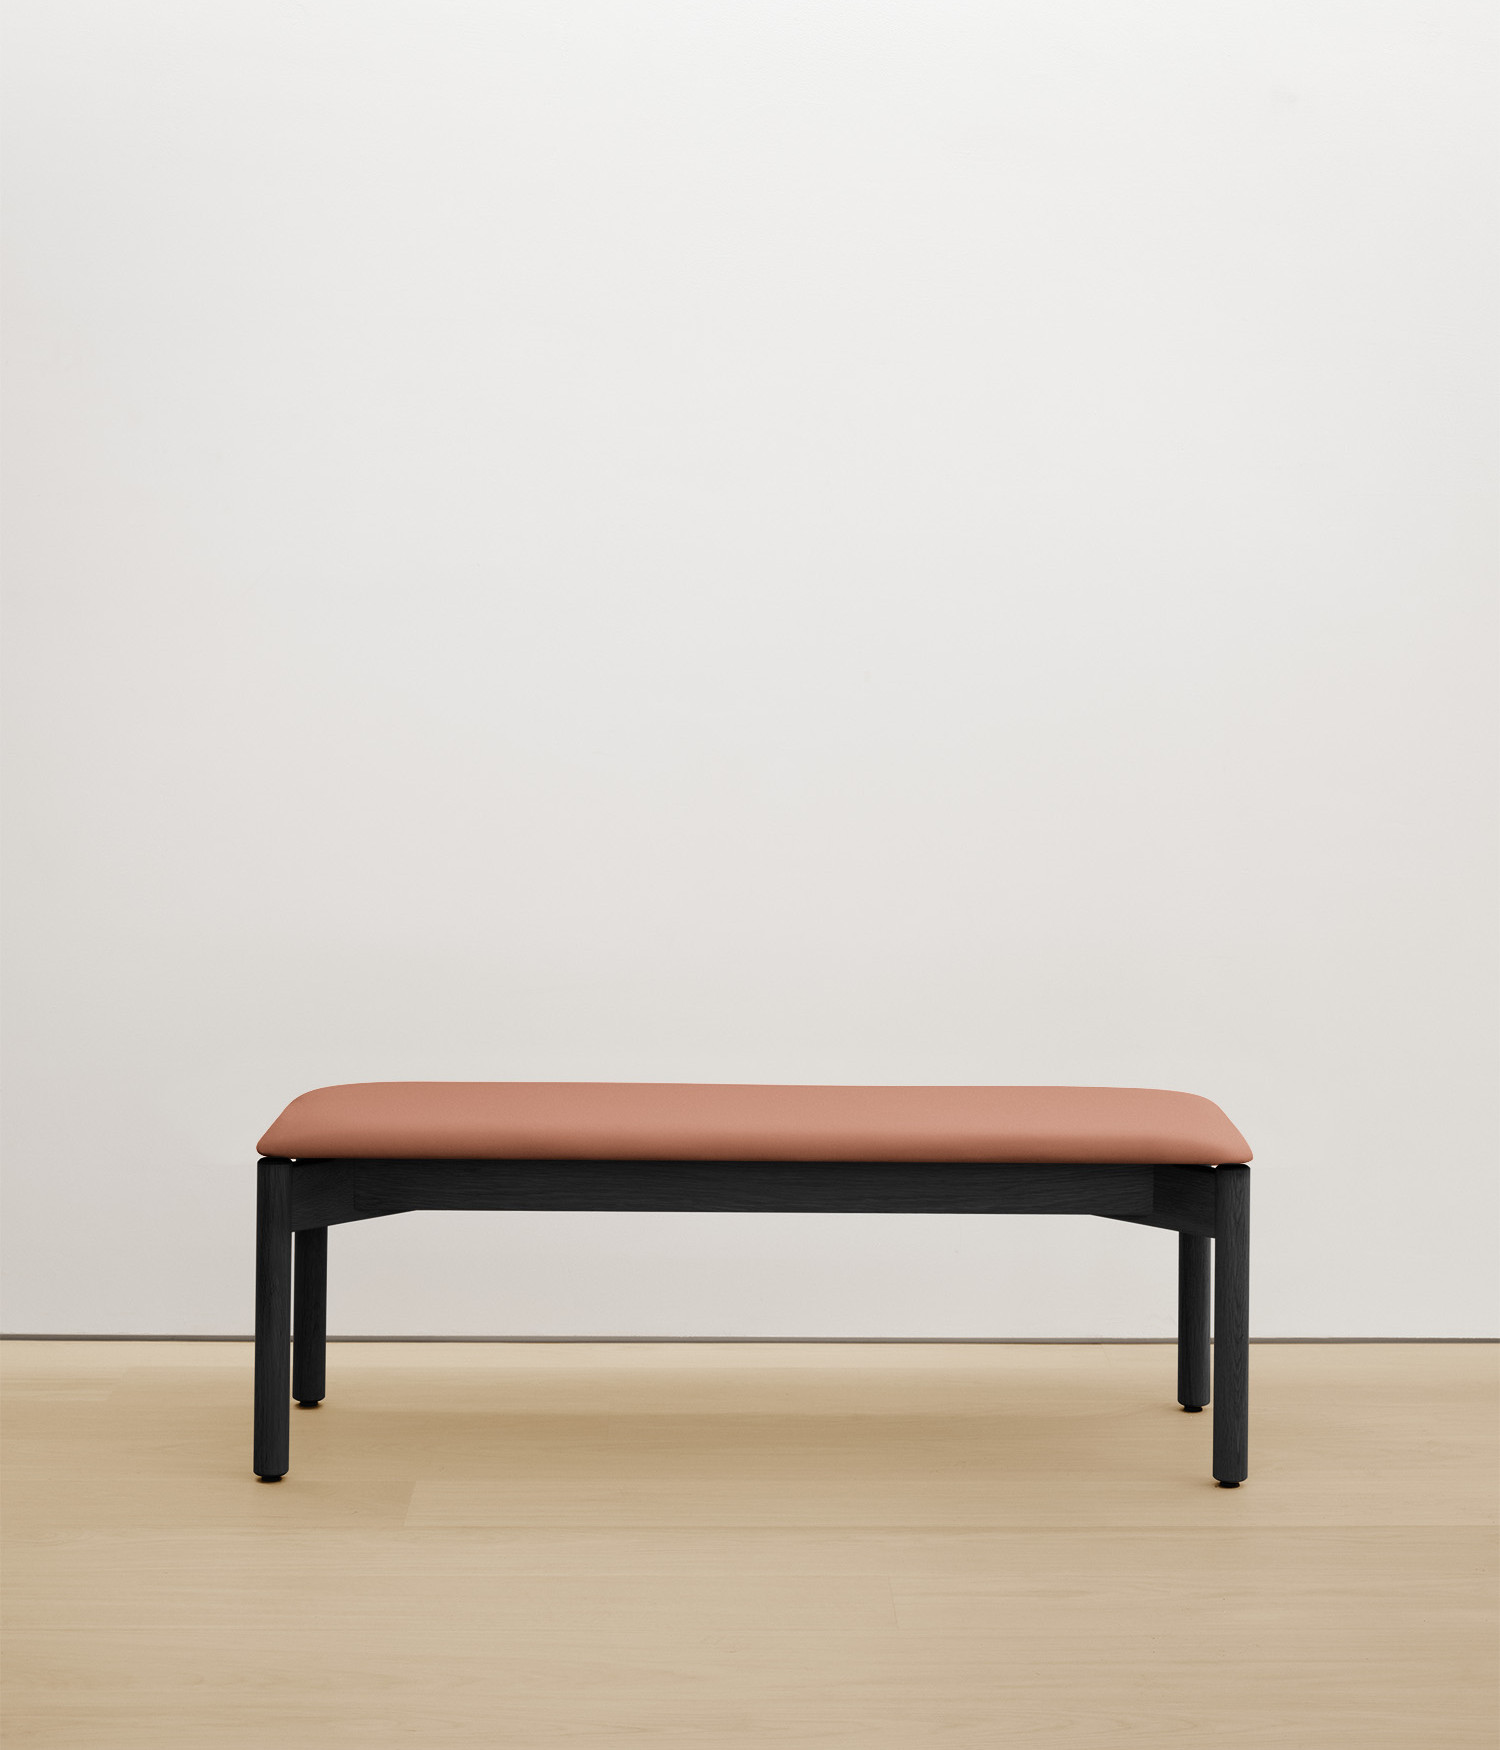 black-stained-oak bench with  upholstered seat